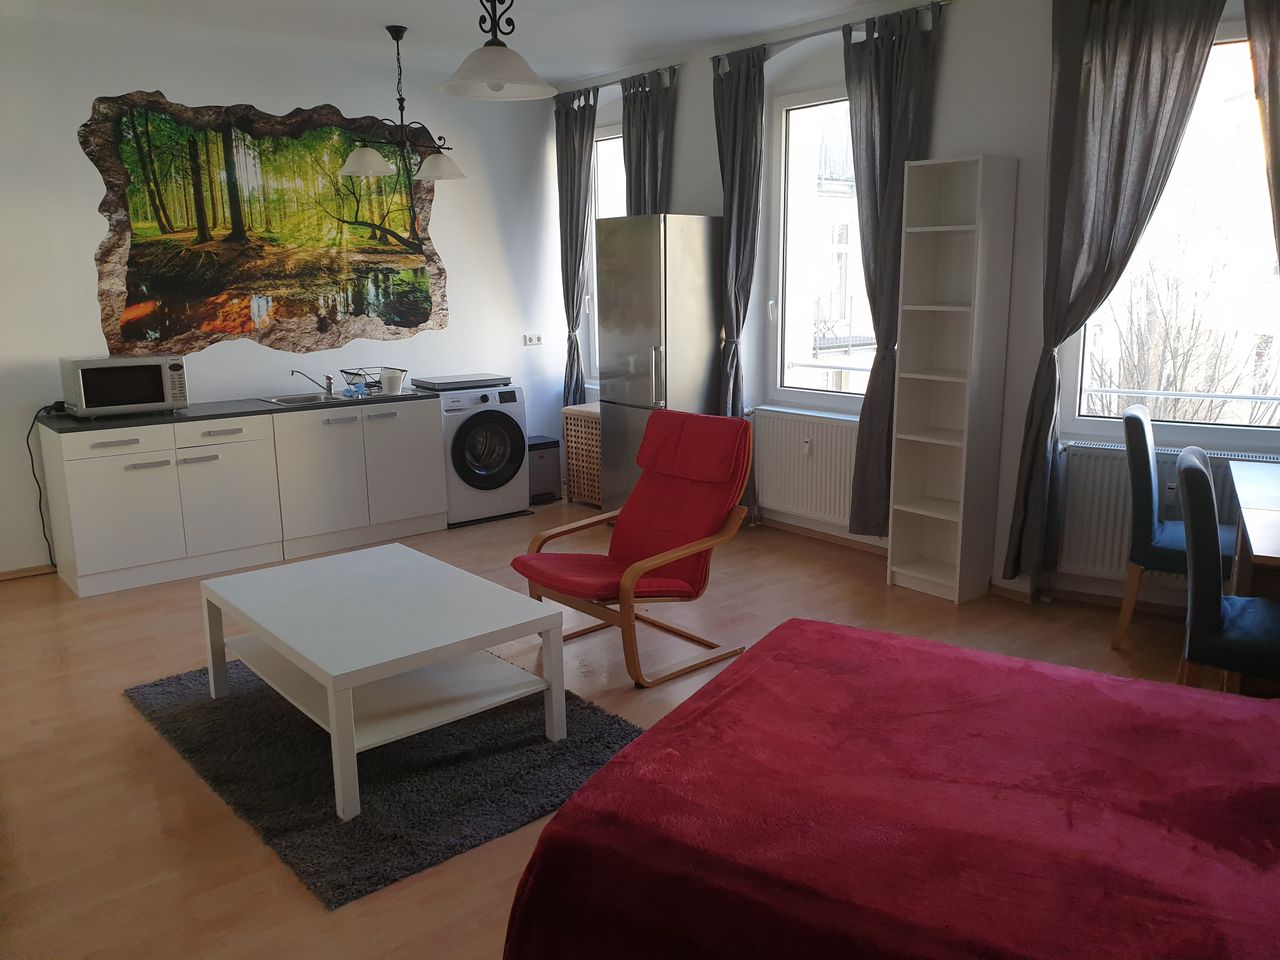 Super central single room flat in Berlin, 2 minutes away from U-Station